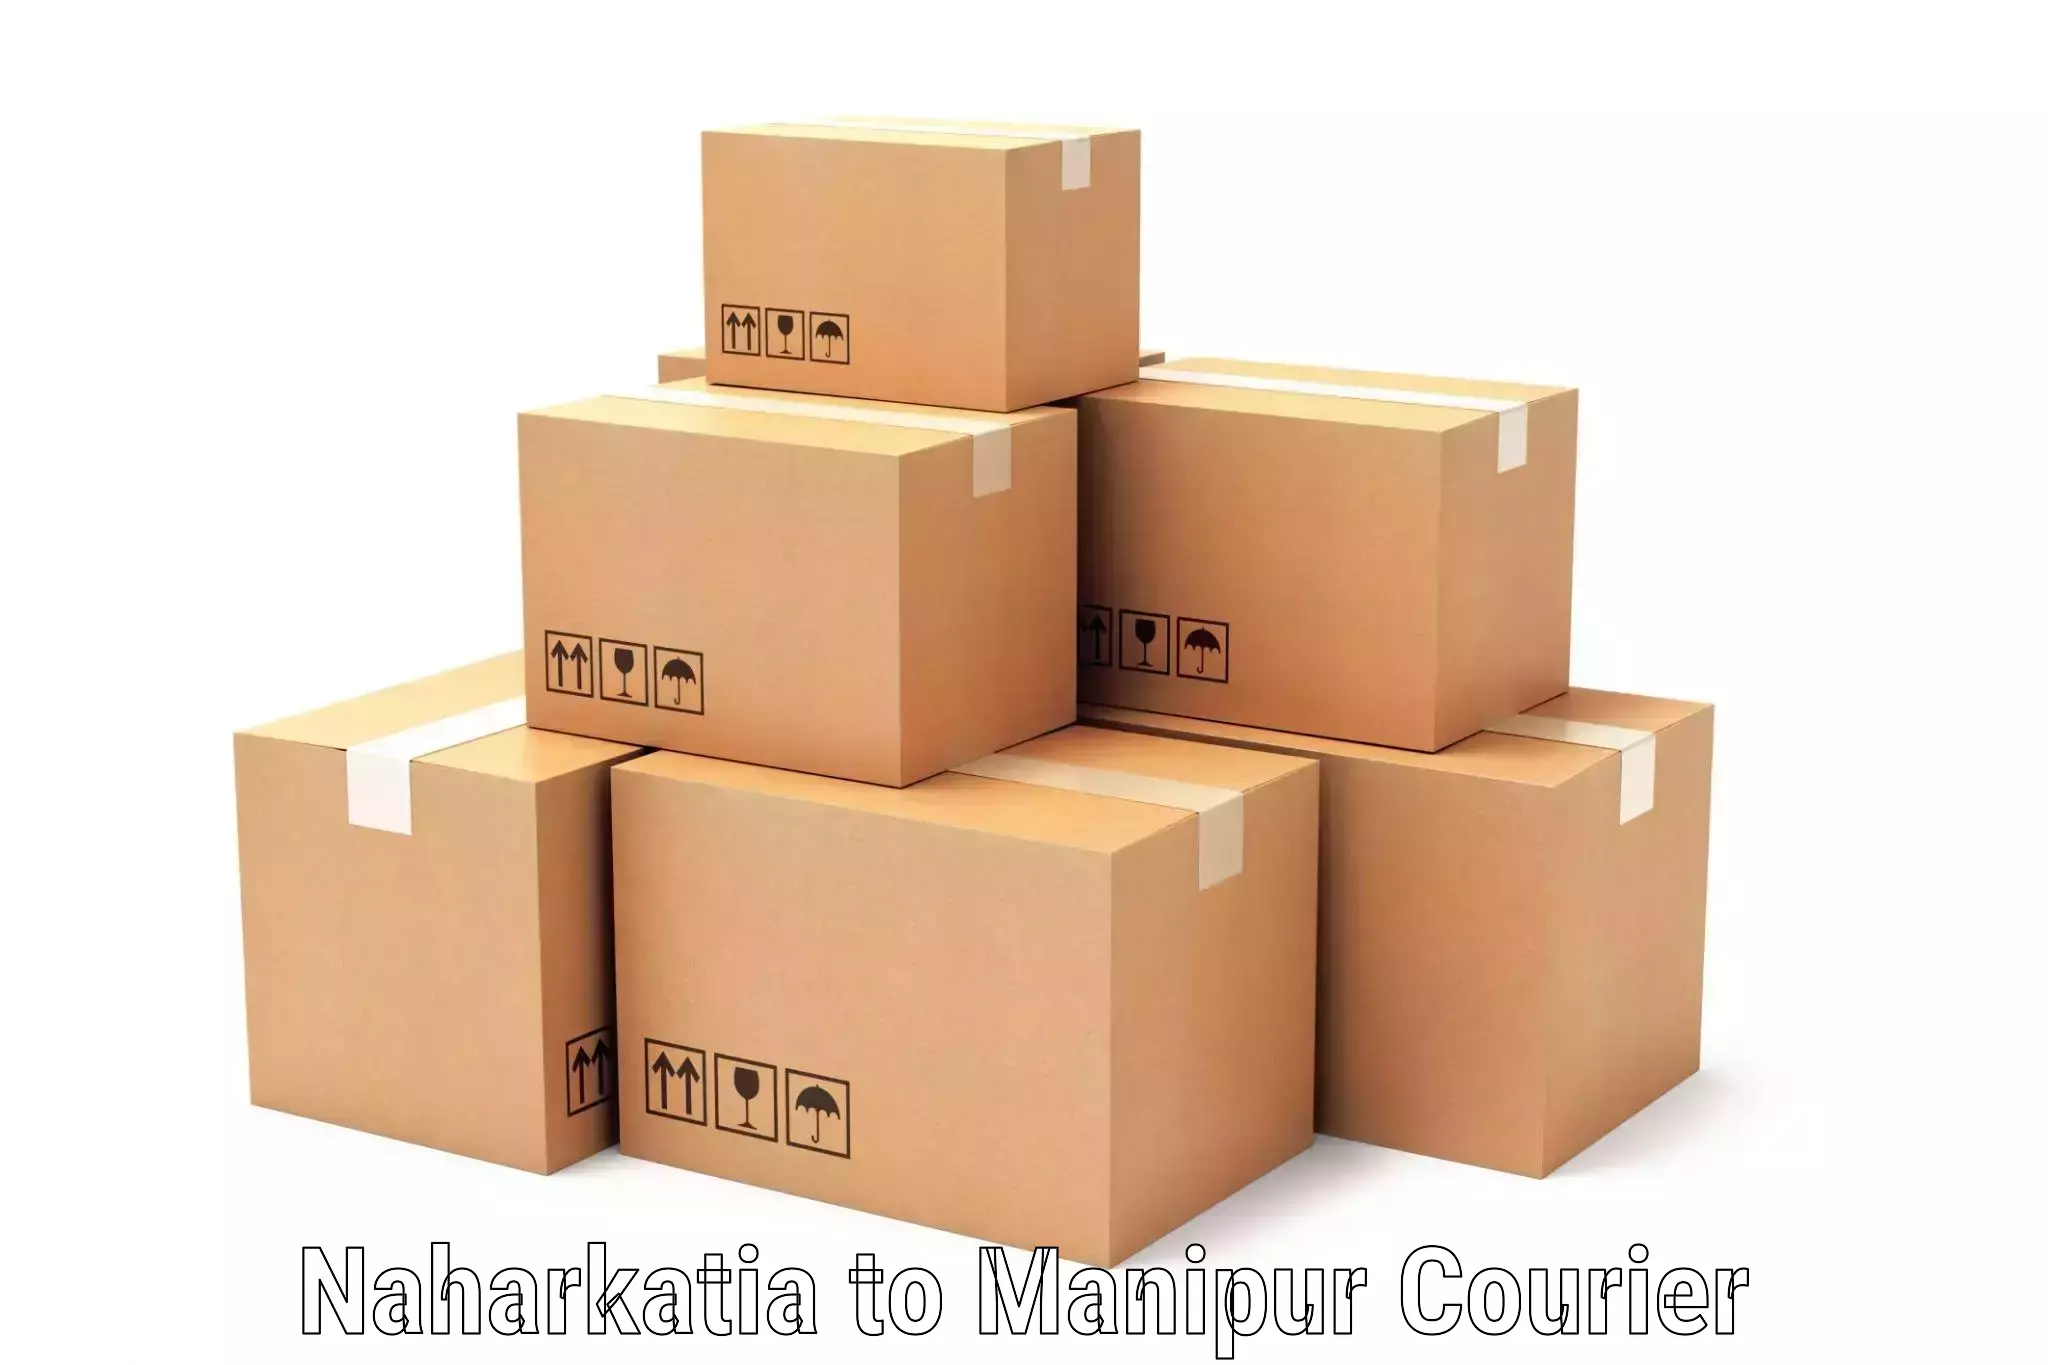 Ocean freight courier Naharkatia to Manipur